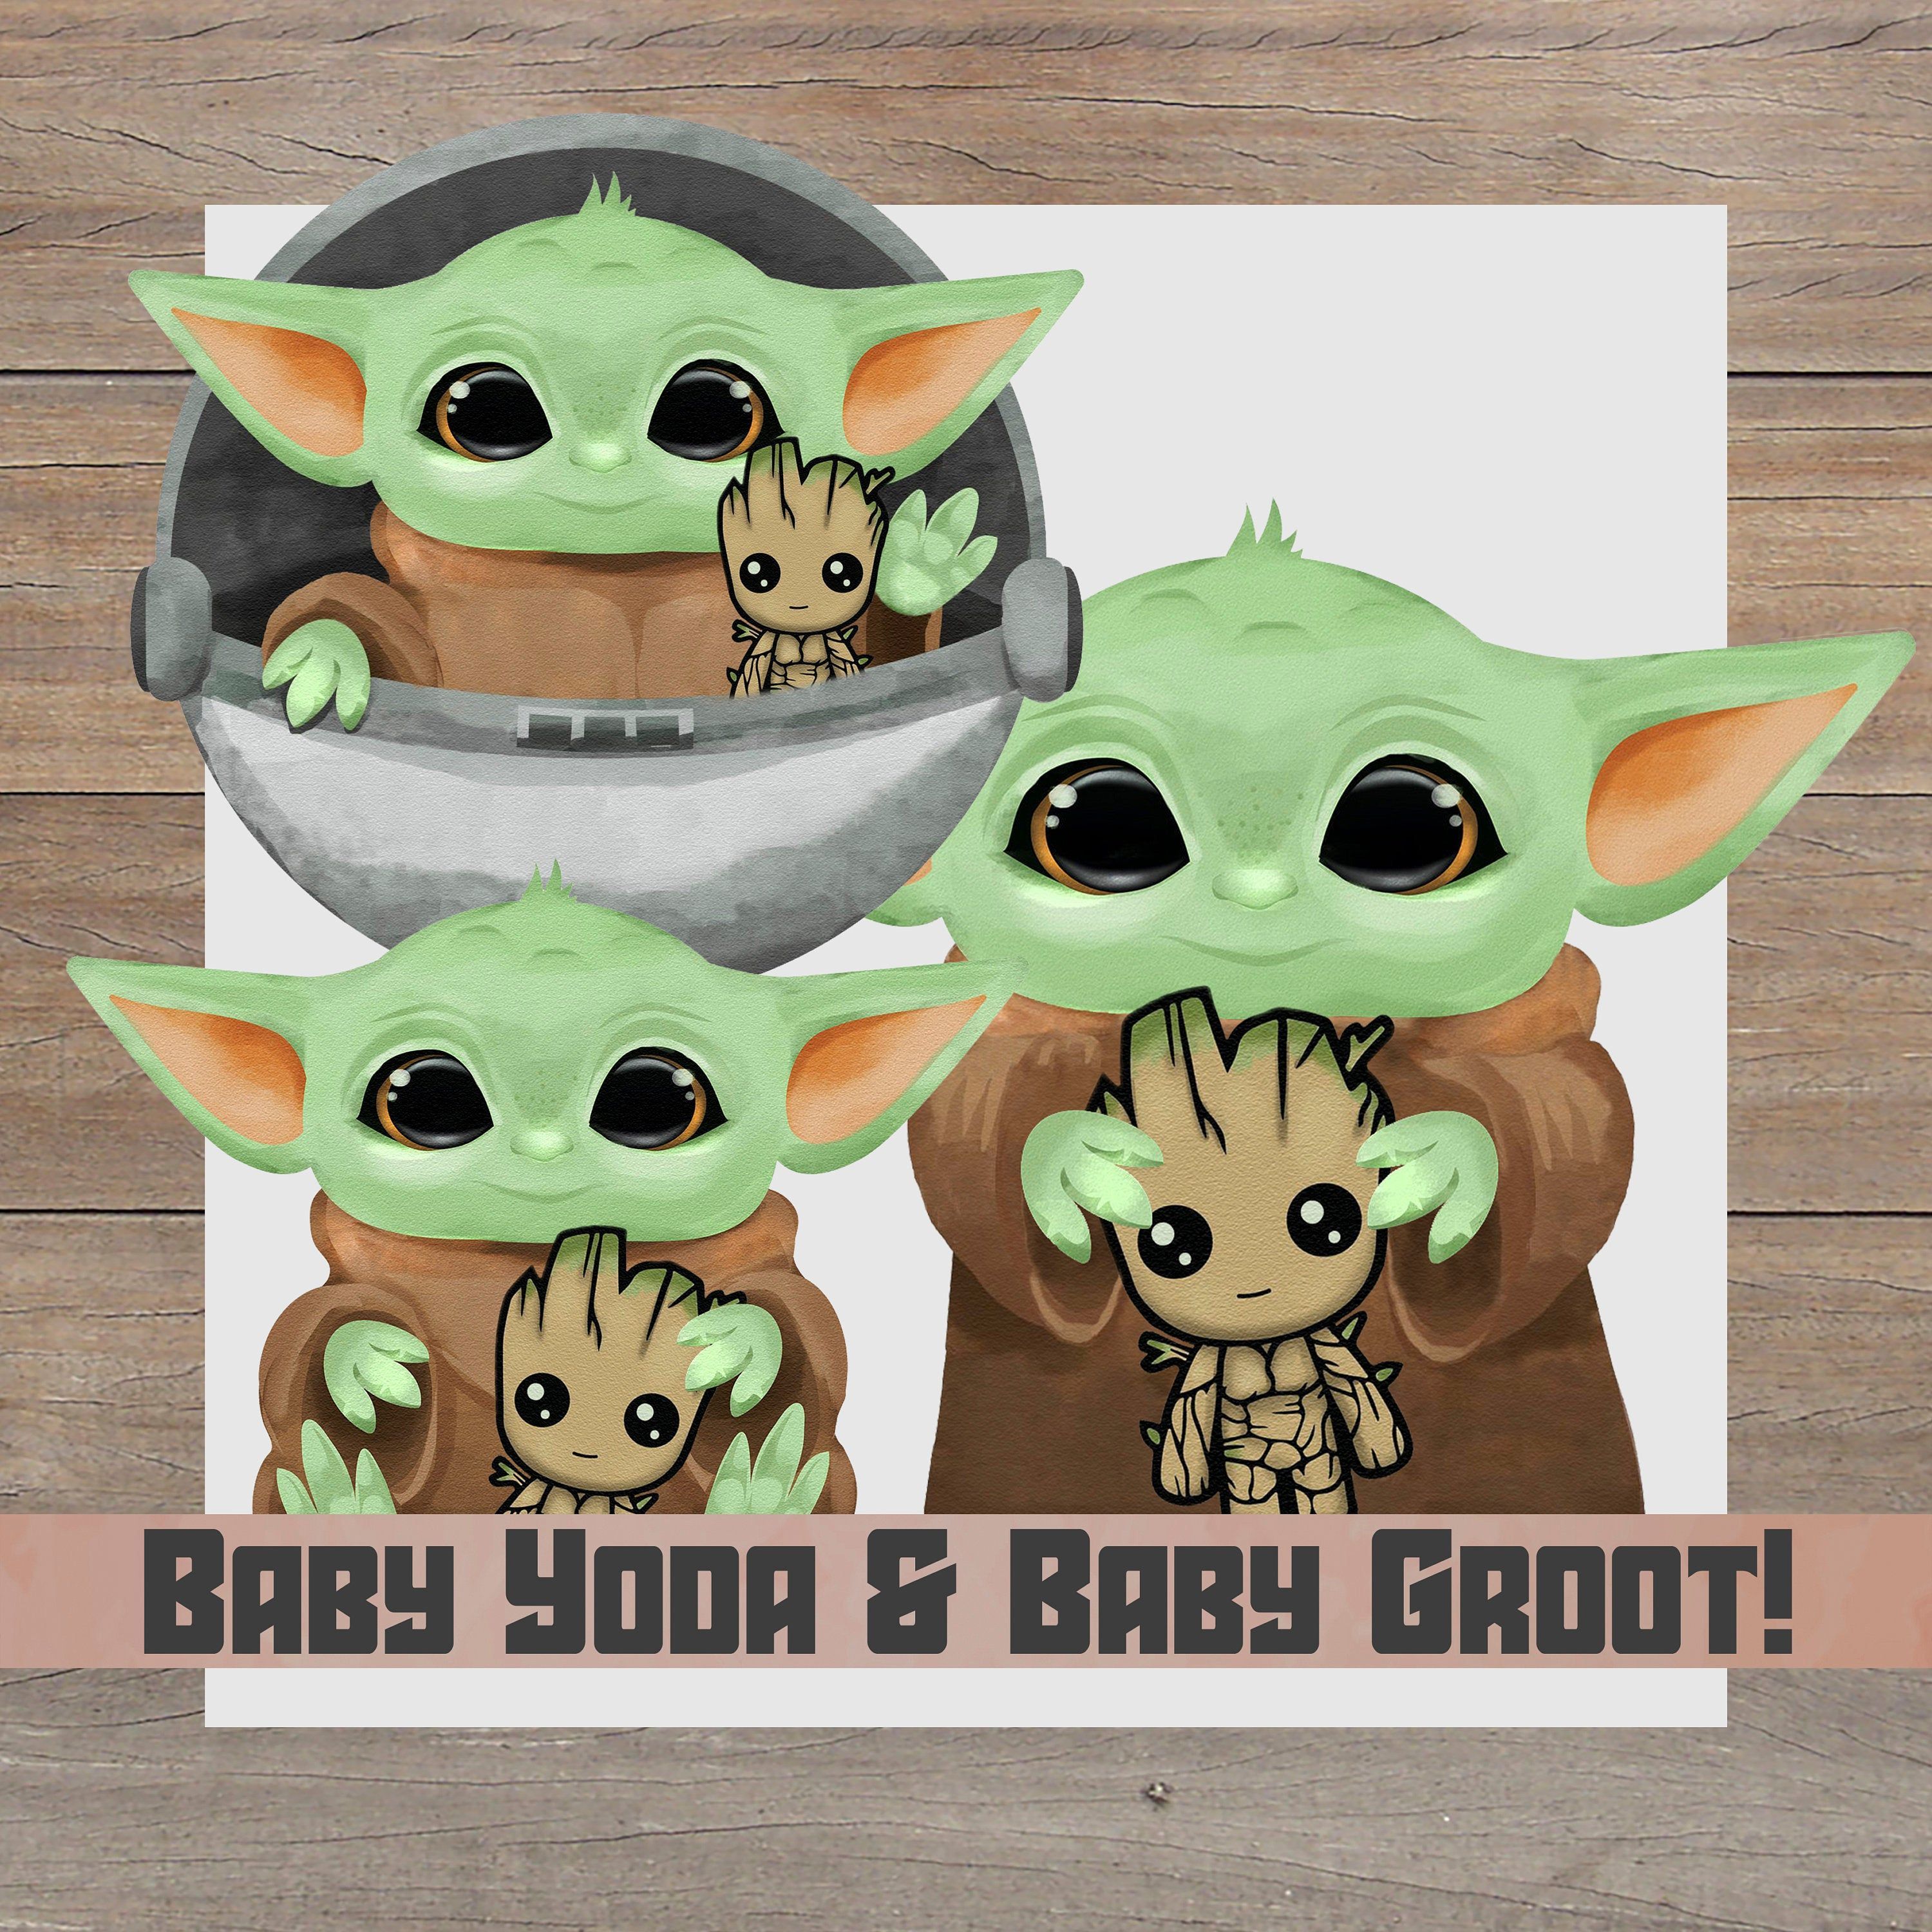 Baby Yoda and Baby Groot PNG triple pack! The Child Holding Baby Groot, Guardian of the Galaxy in his Spaceship, Sitting or Standing. Baby groot, Yoda drawing, Holding baby